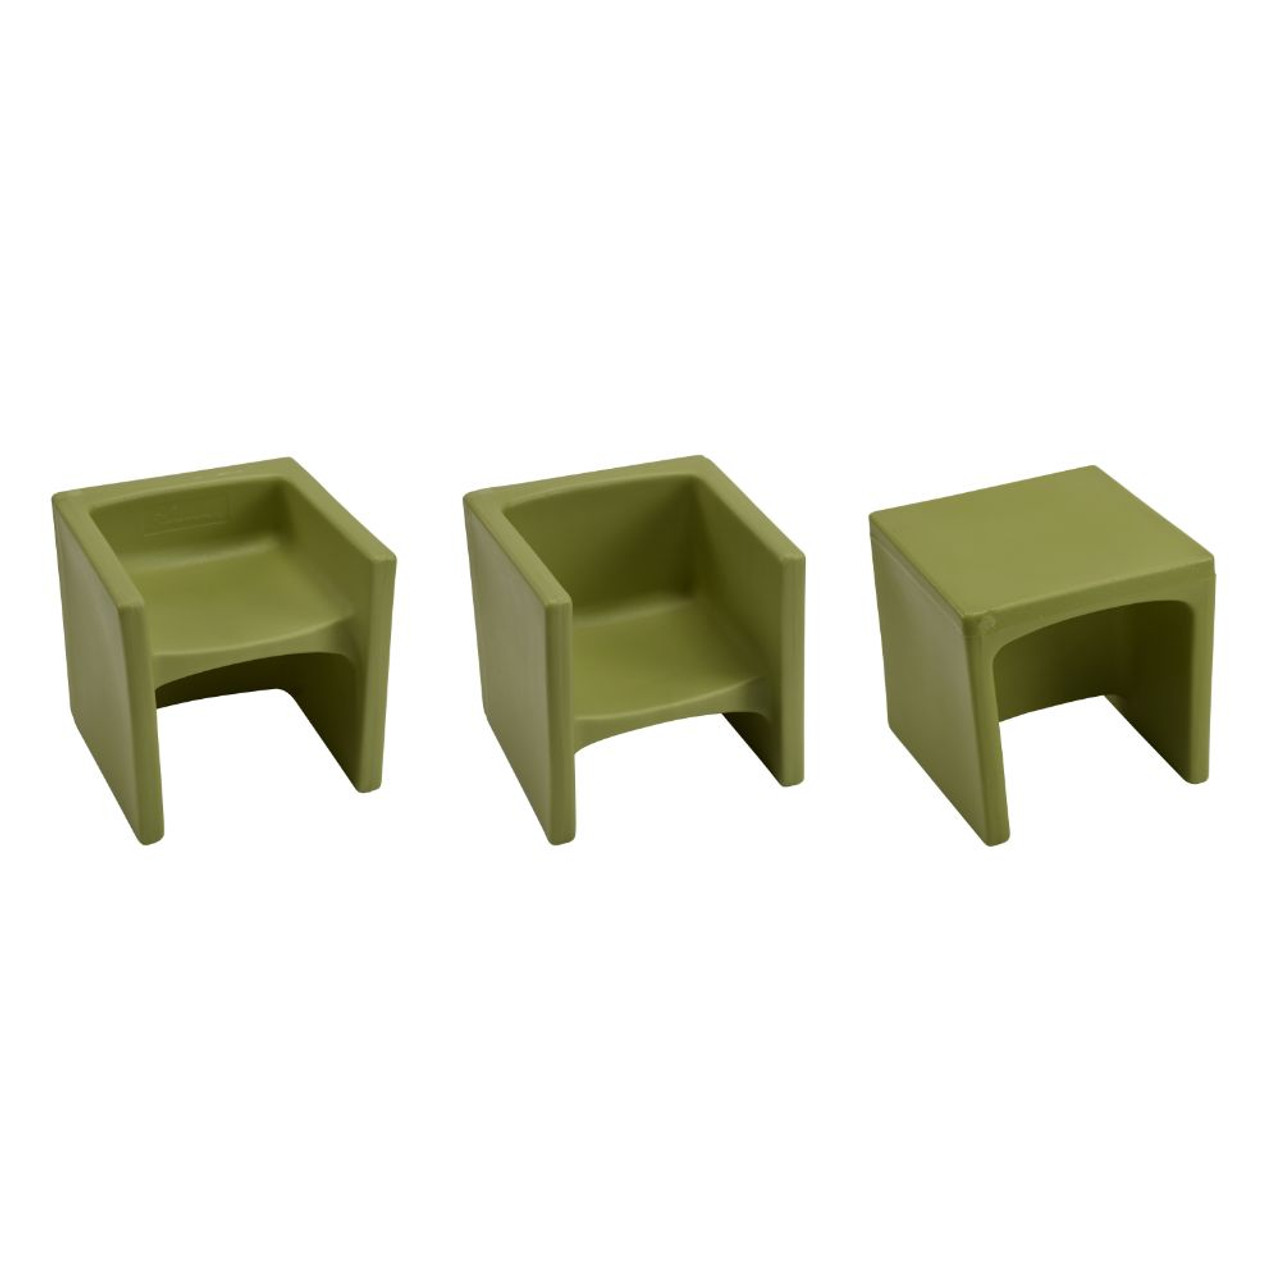 Chair3 Molded Seats - 3 uses